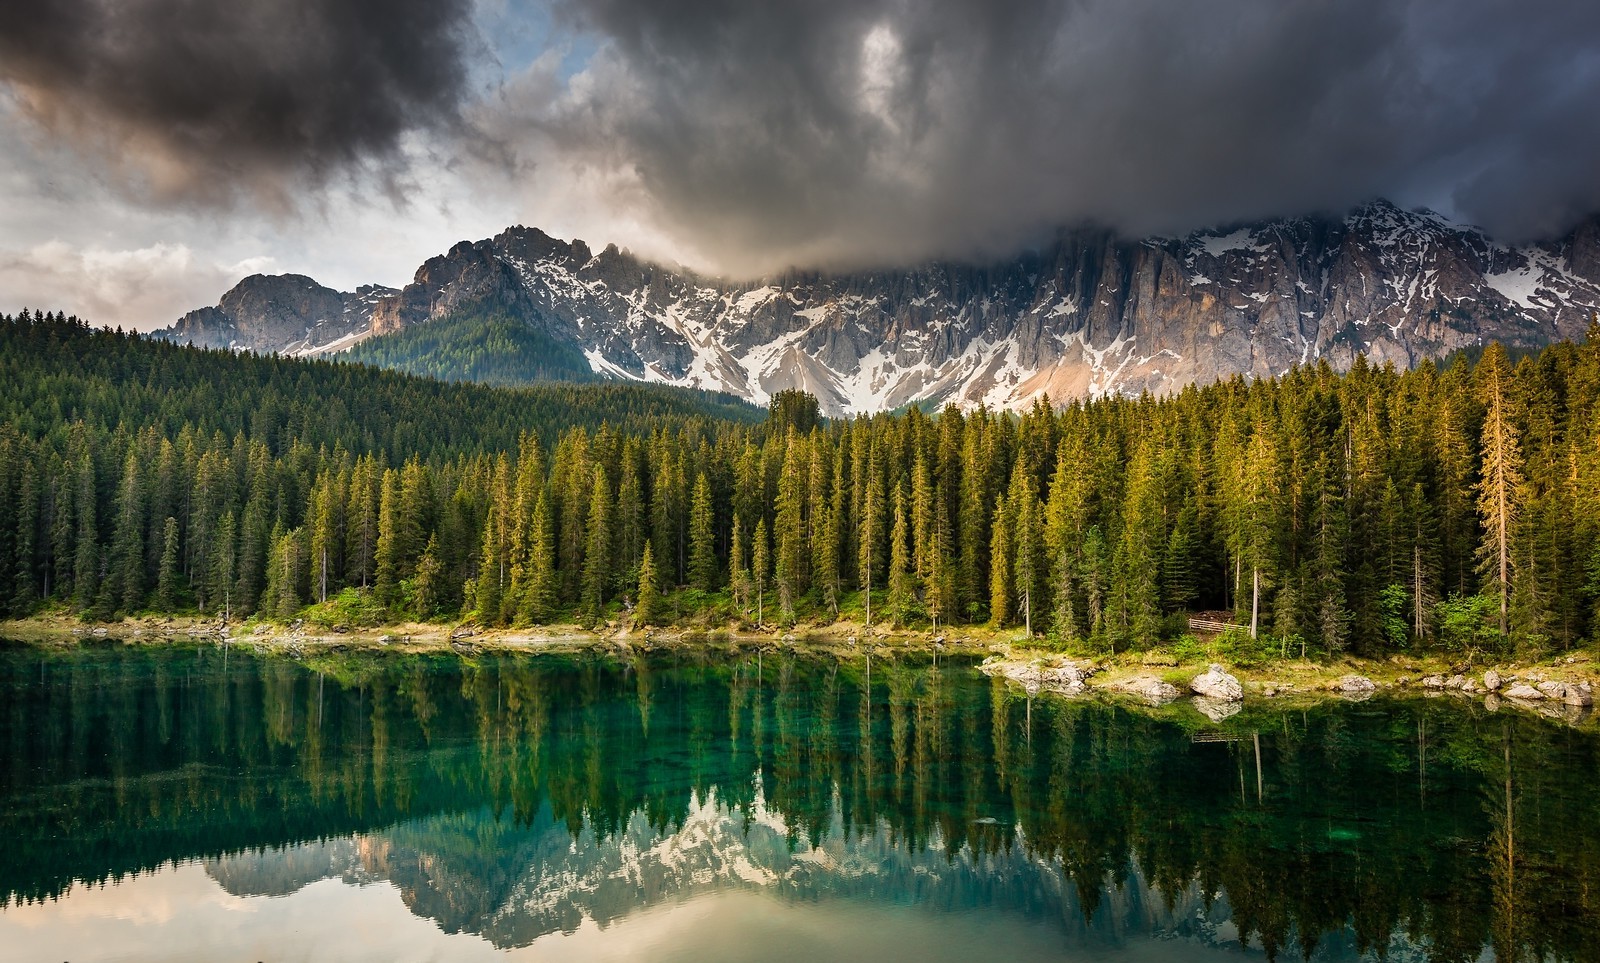 lake, Forest, Mountain, Clouds, Water, Green, Reflection, Trees, Snowy Peak, Alps, Italy, Nature, Landscape Wallpaper